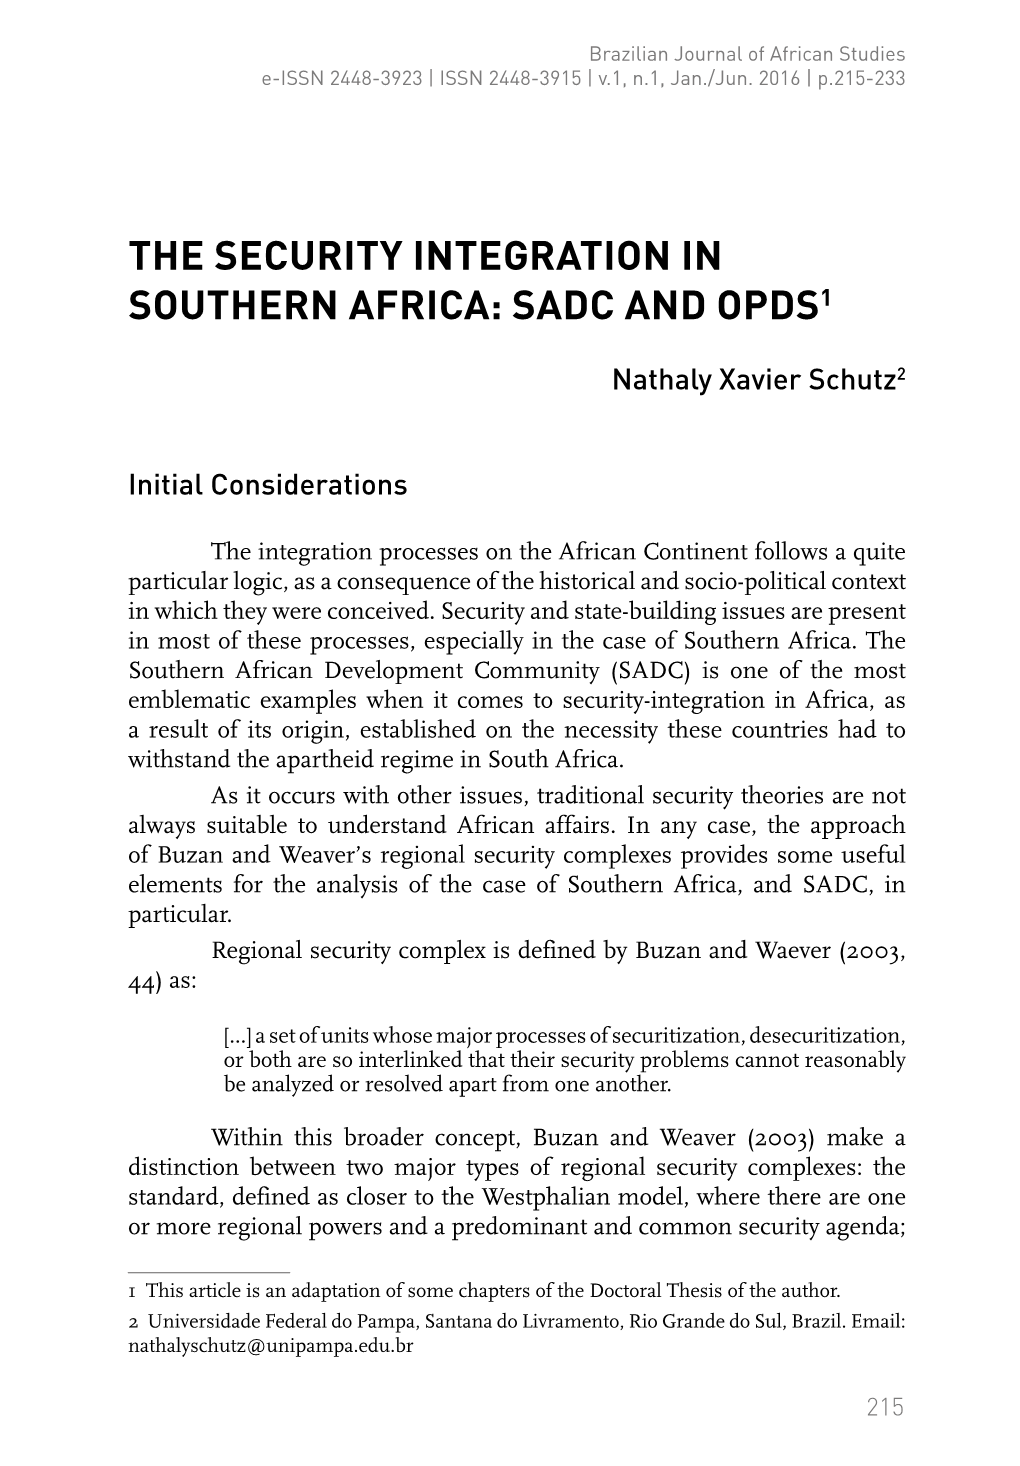 The Security Integration in Southern Africa: Sadc and Opds1